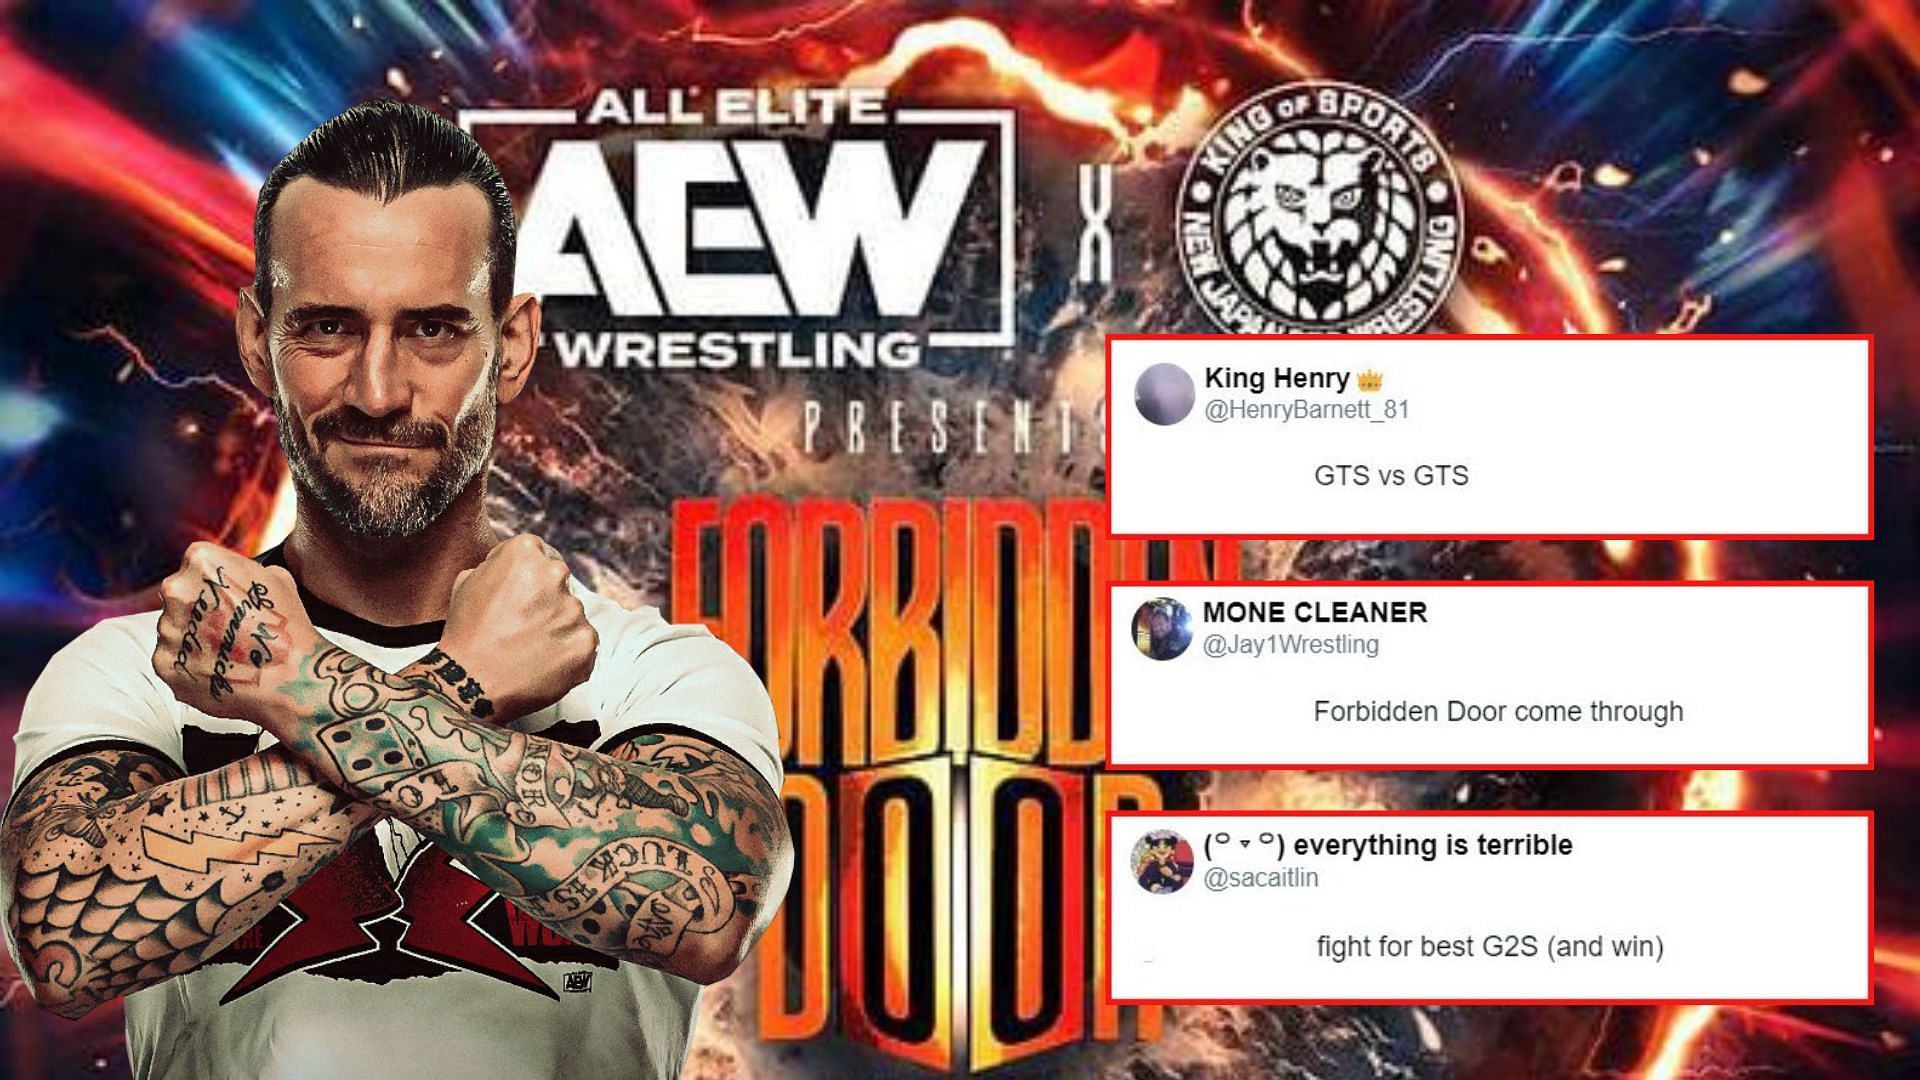 CM Punk was last seen at AEW All Out